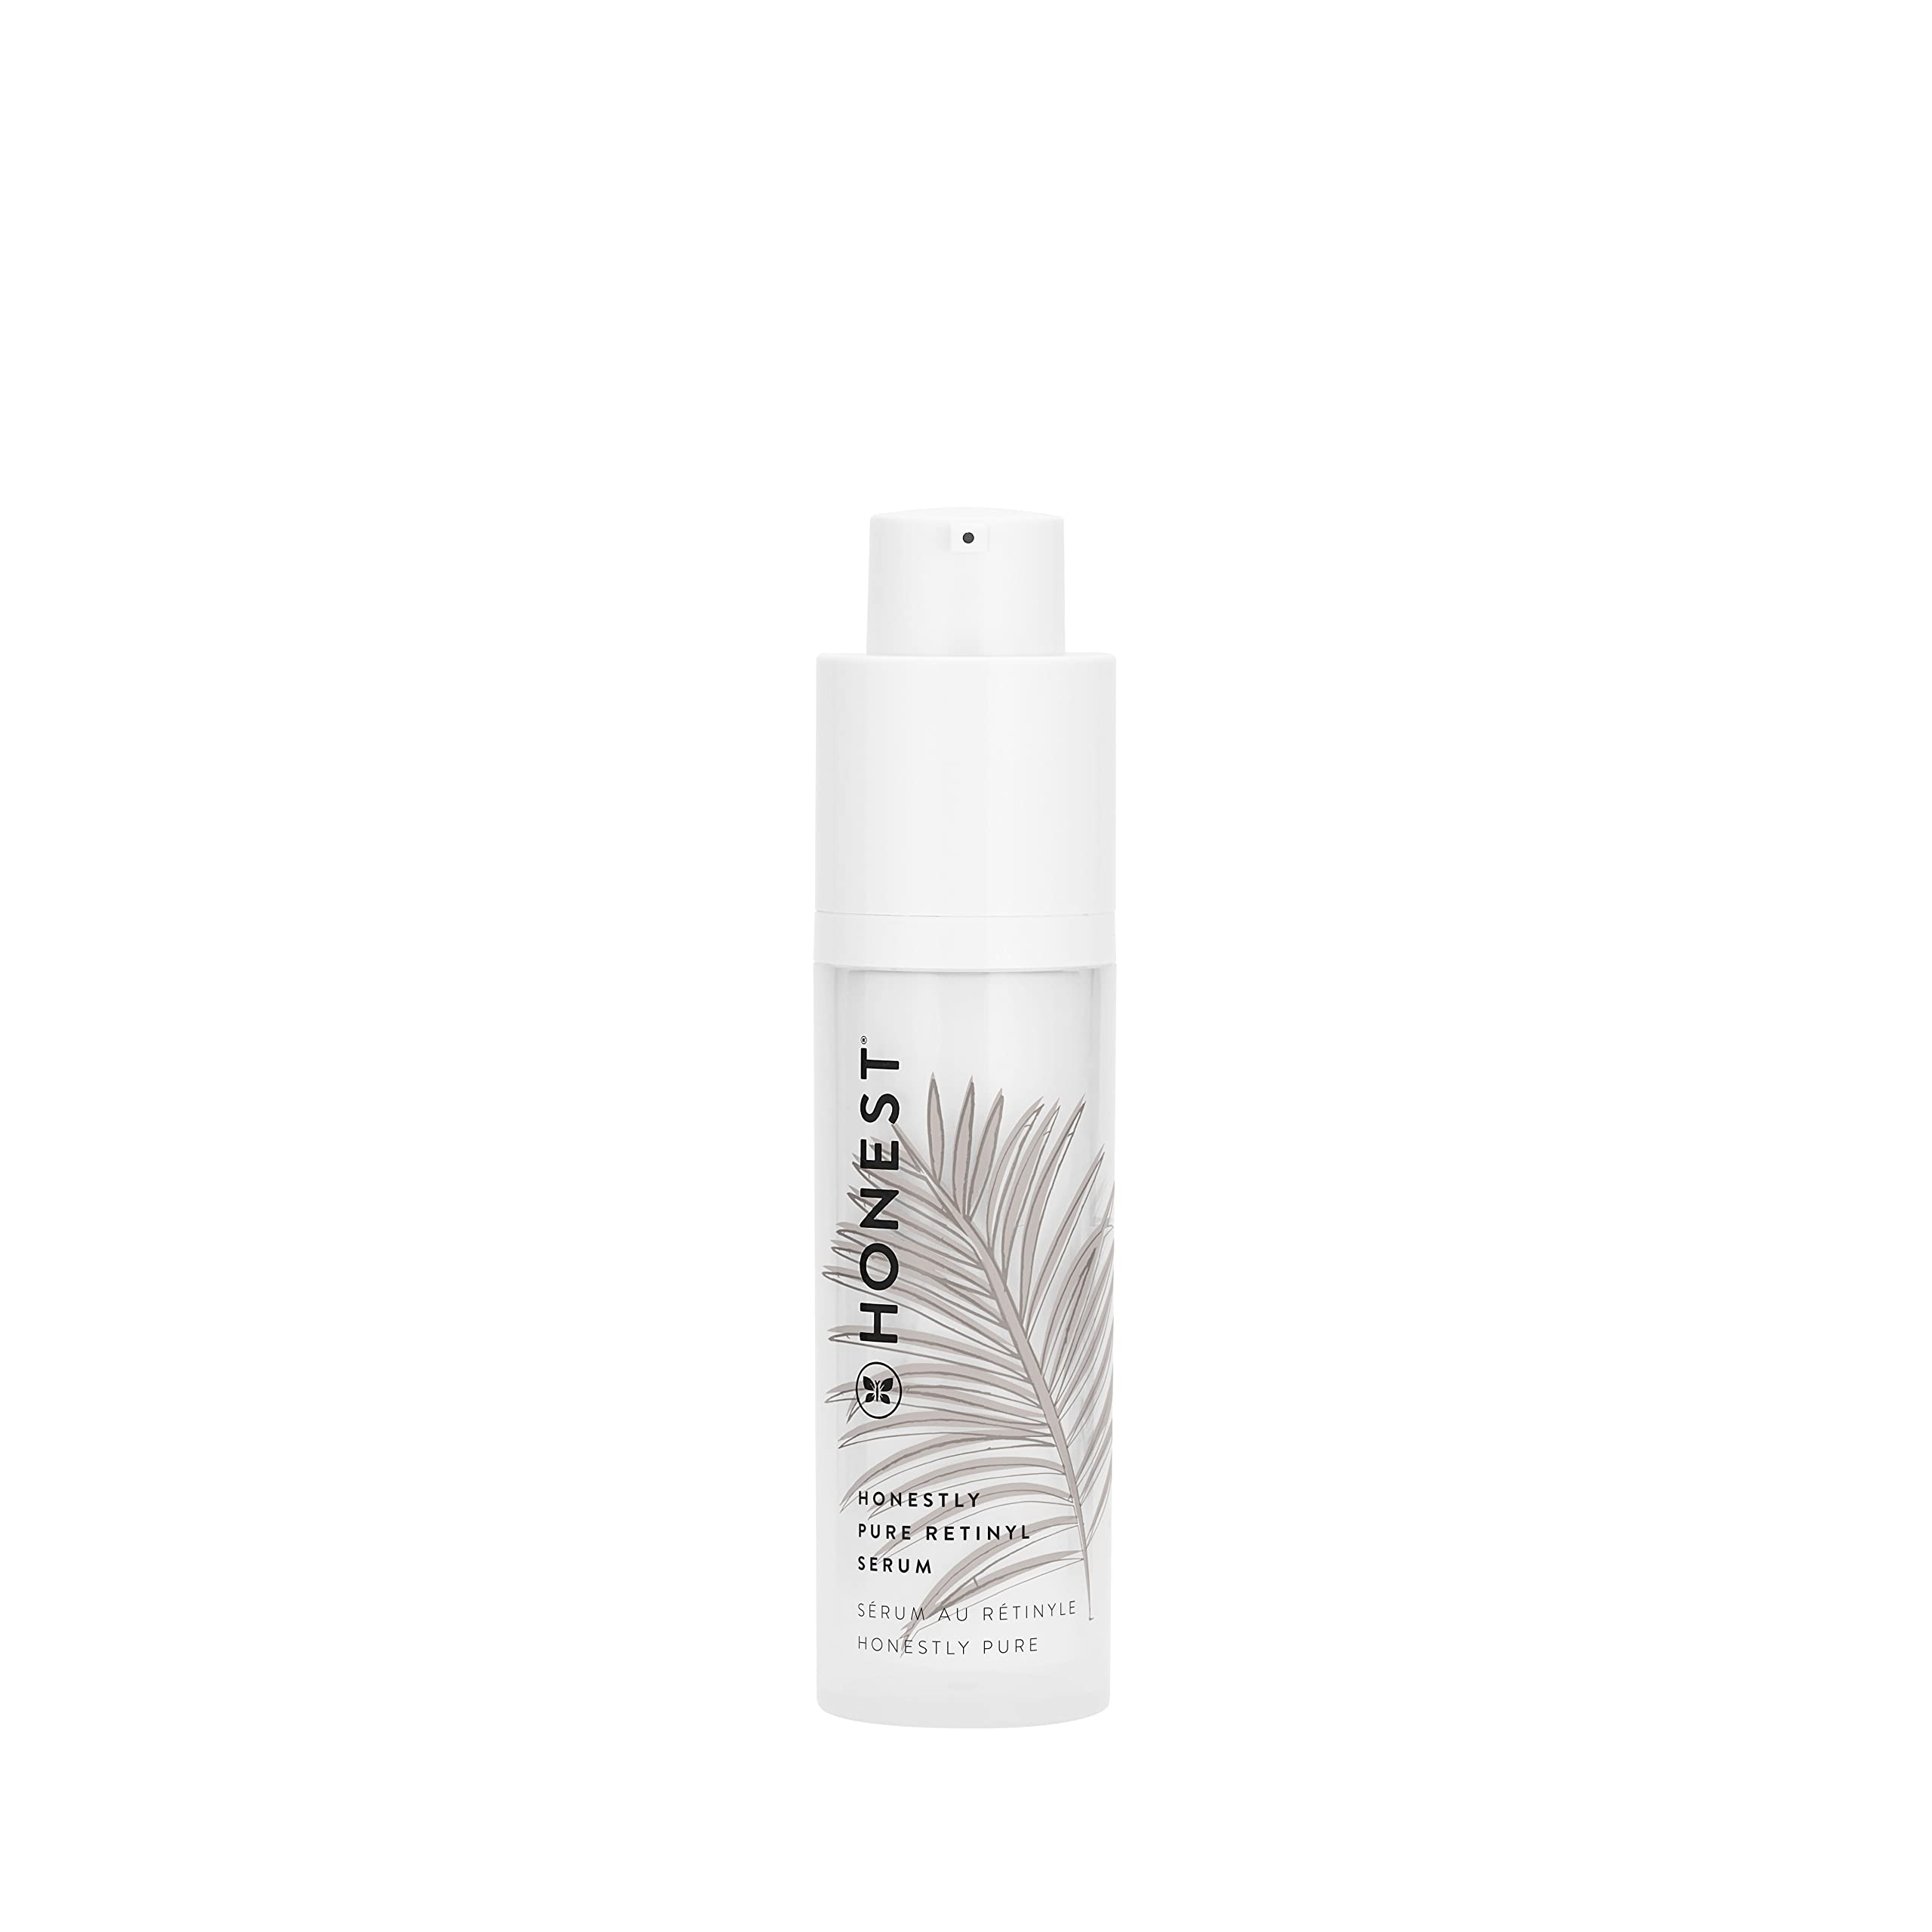 Honest Beauty Honestly Pure Retinyl Serum with Retinyl Linoleat to help reduce the appearance of fine lines + wrinkles | Dermatologist Tested | Vegan + Cruelty Free | 1 Fl. Oz.